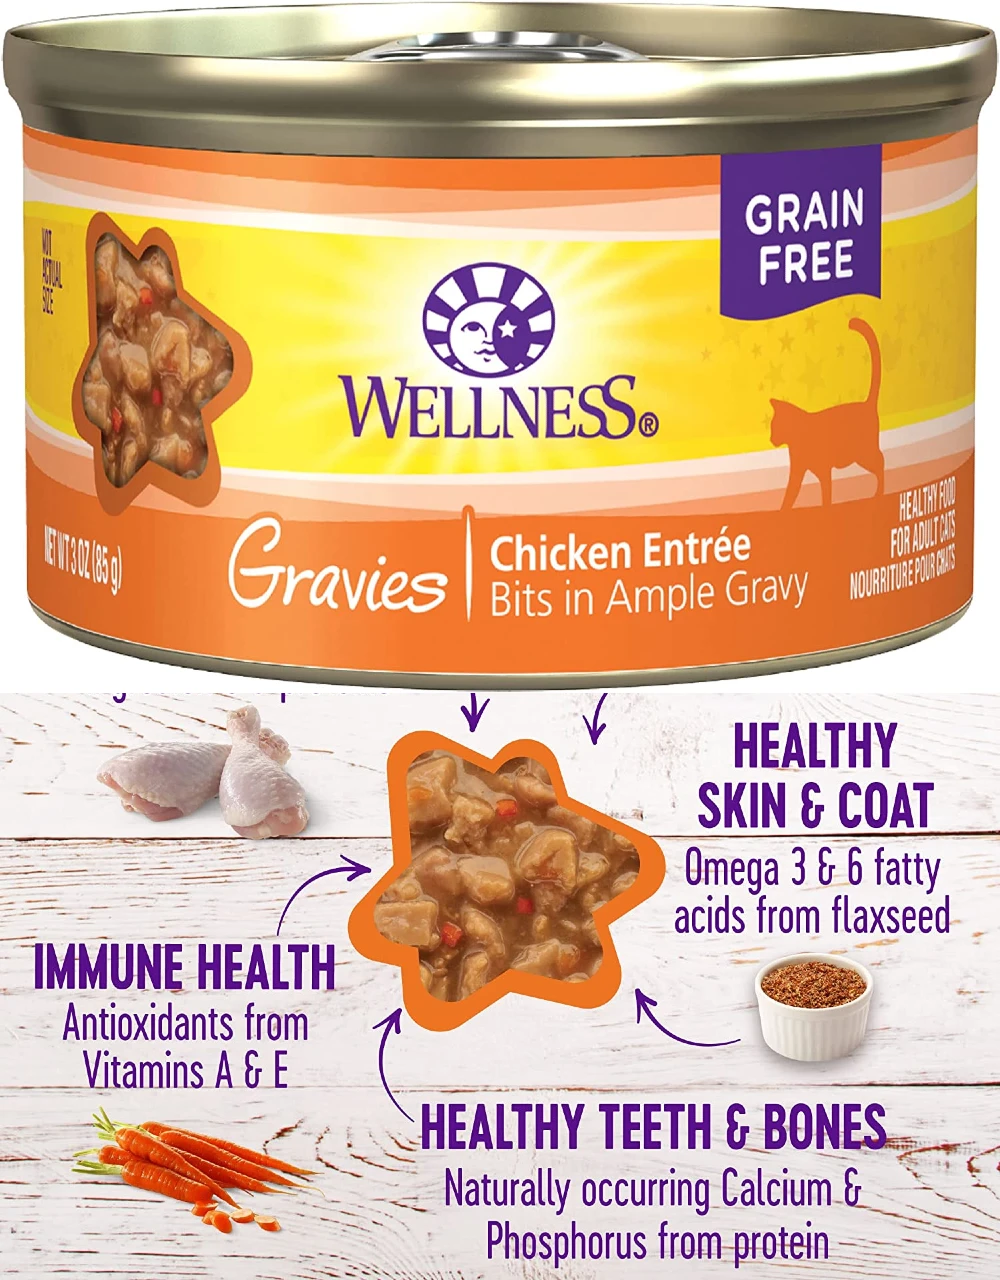 Wellness Complete Health Gravies Grain Free Canned Cat Food